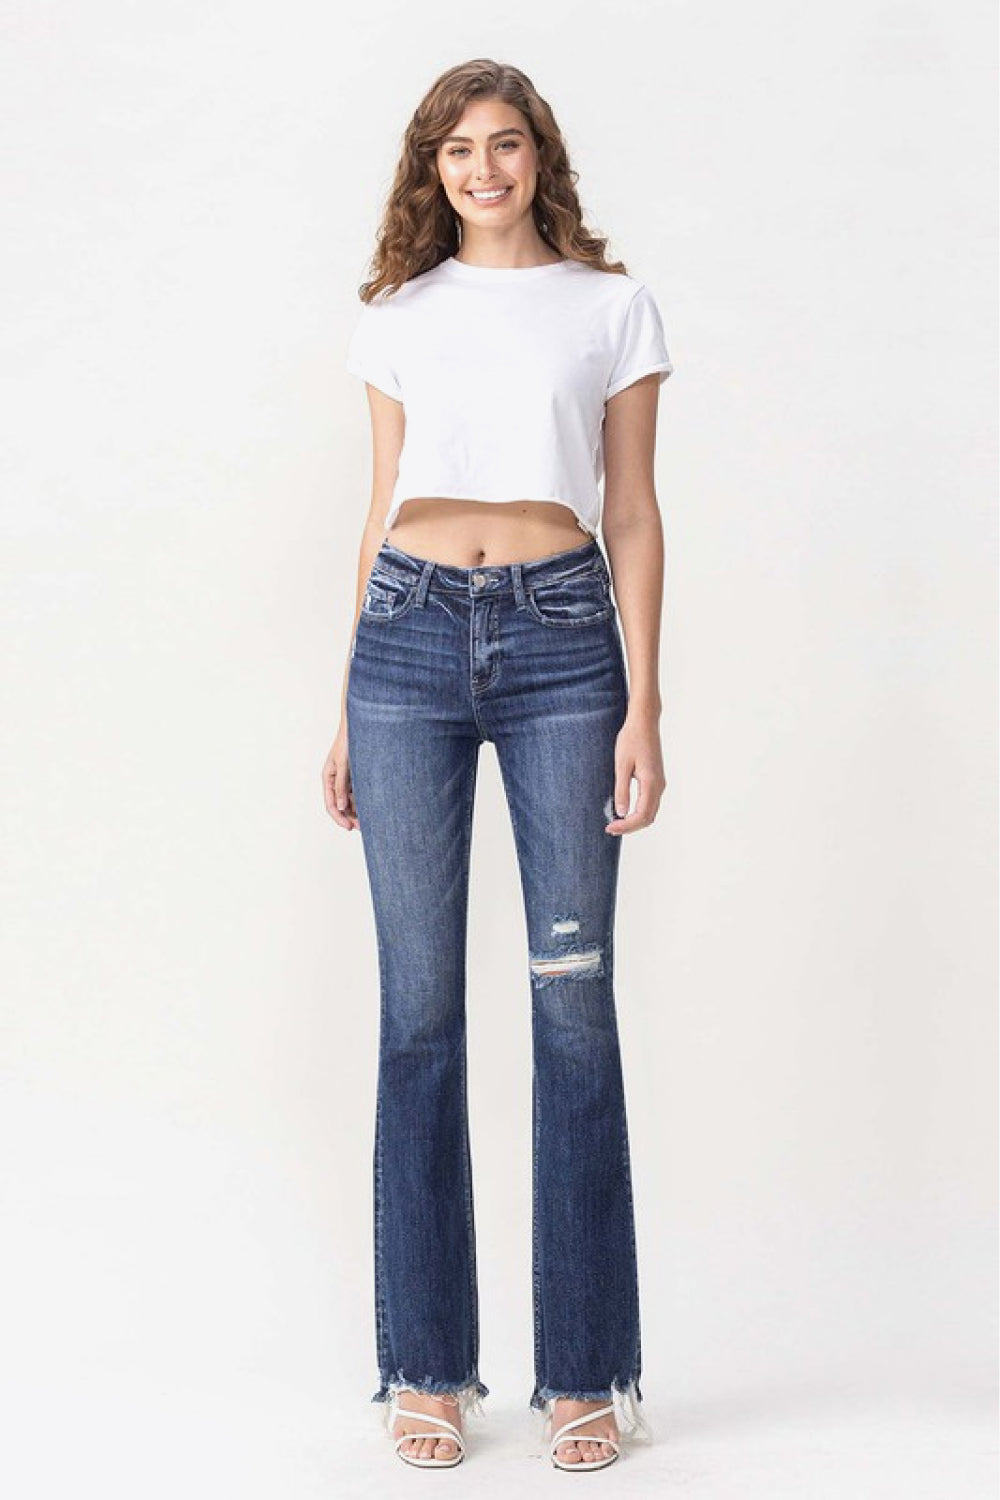 Vervet by Flying Monkey Luna Full Size High Rise Flare Jeans - Ships from The US - women's jeans at TFC&H Co.